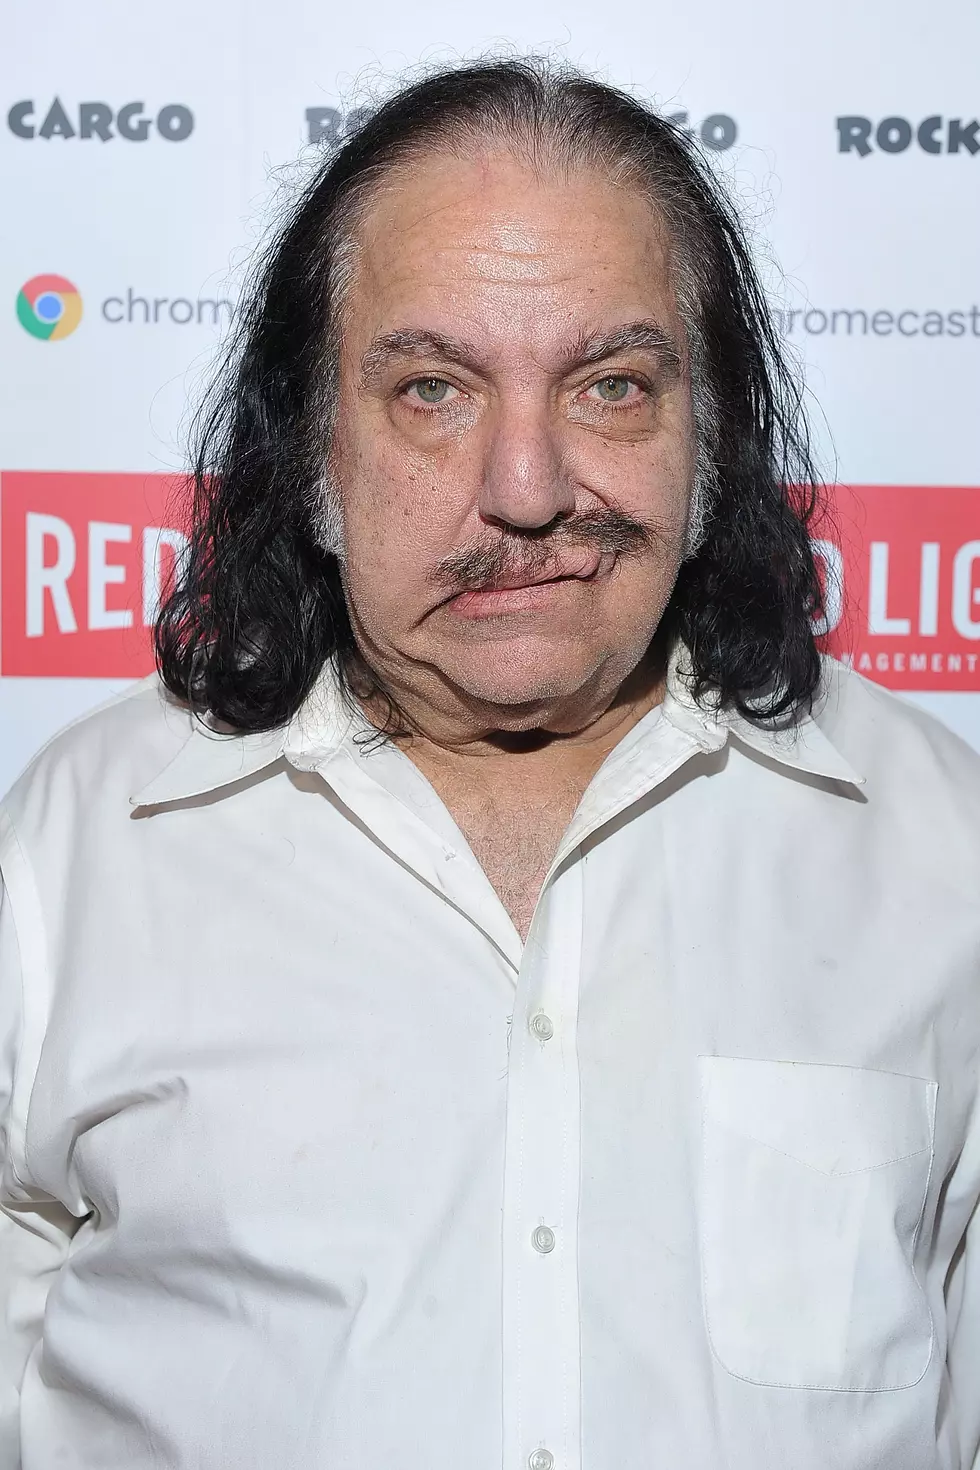 Ron Jeremy Is Coming To Proctors For “The Great Porn Debate”